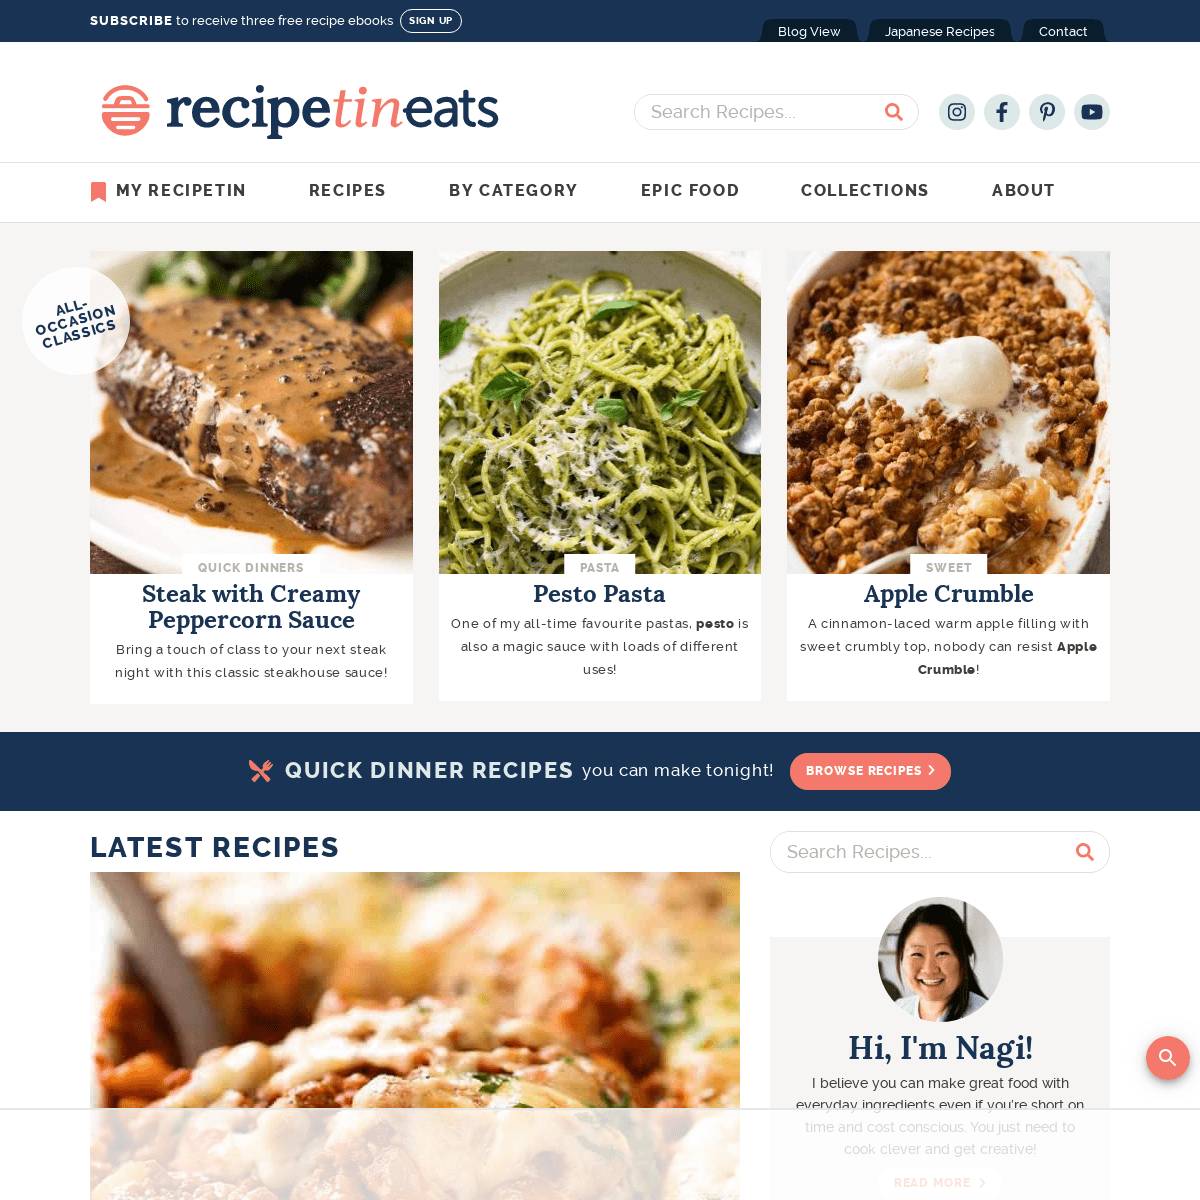 A complete backup of recipetineats.com